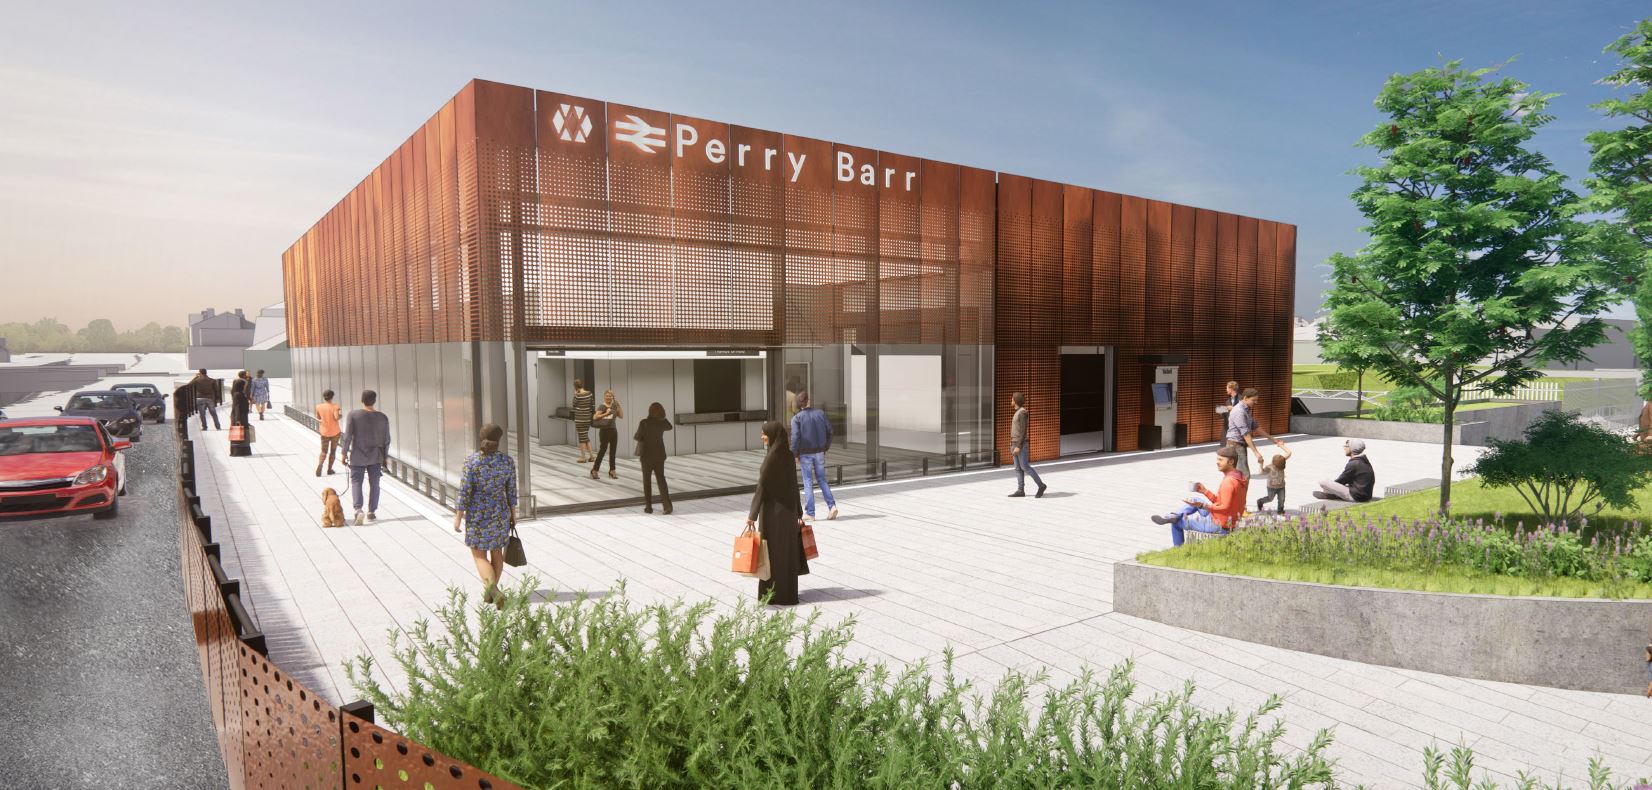 Designs for new Perry Barr railway station revised following feedback